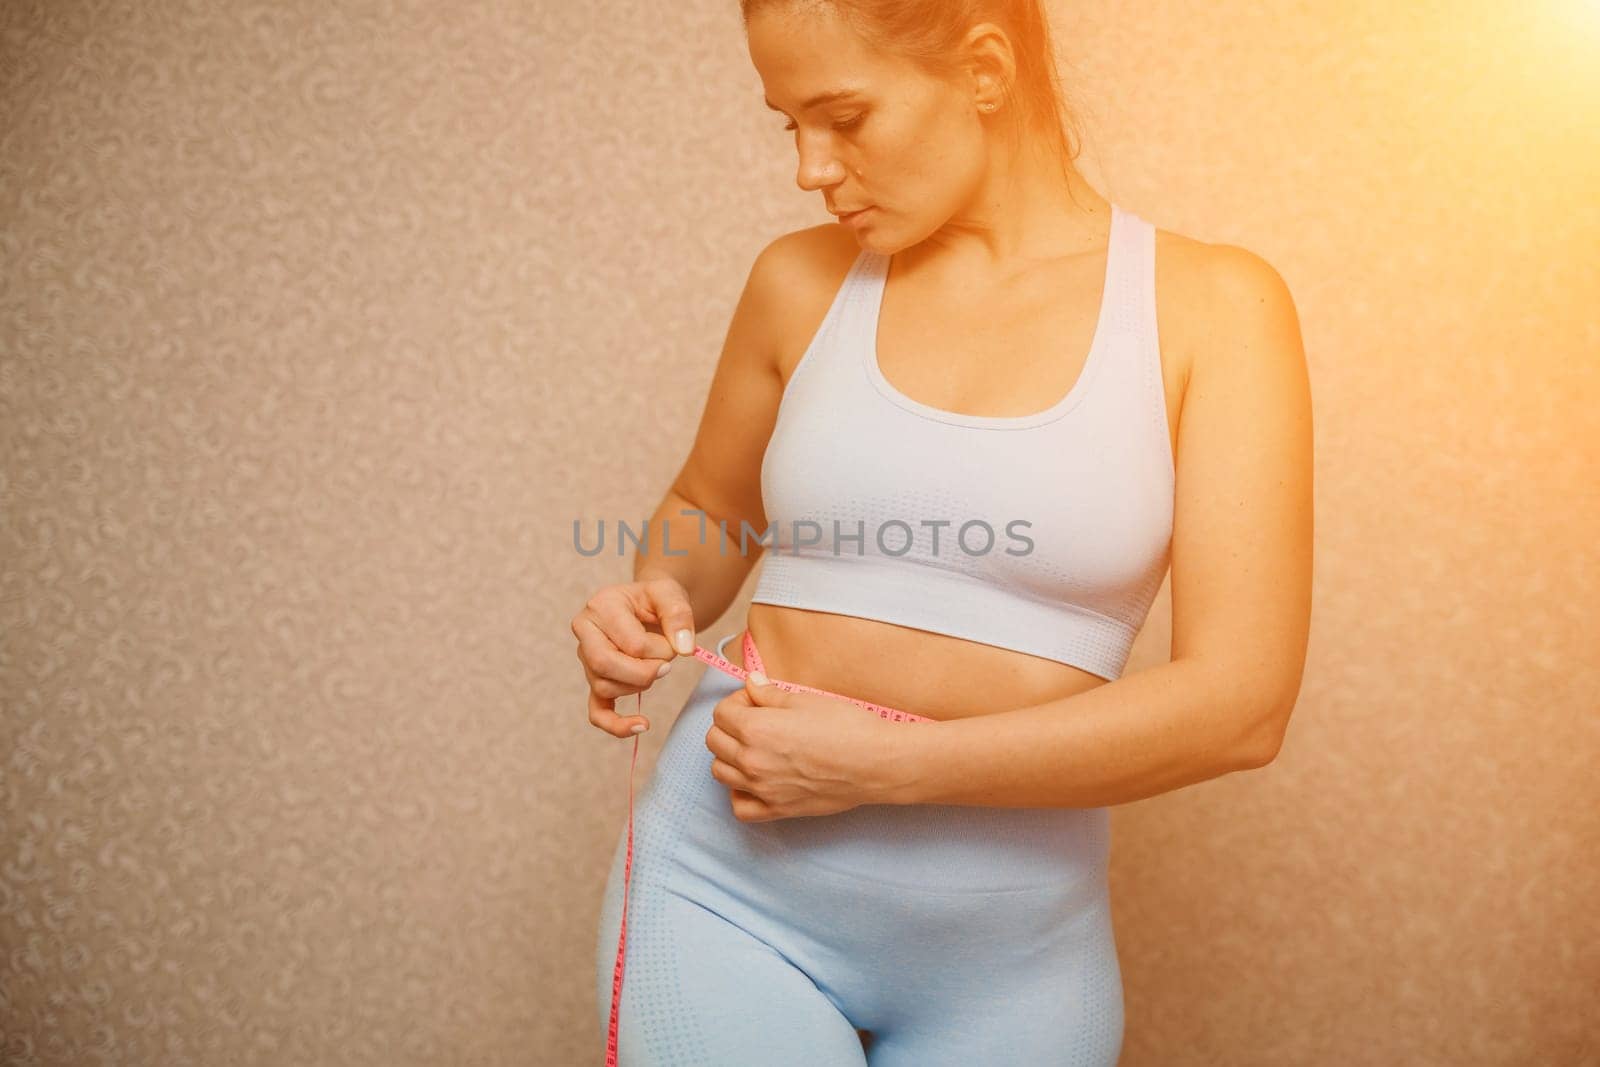 Cropped view of slim woman measuring waist with tape measure at home, close up. European woman checking the result of diet for weight loss or liposuction indoors.